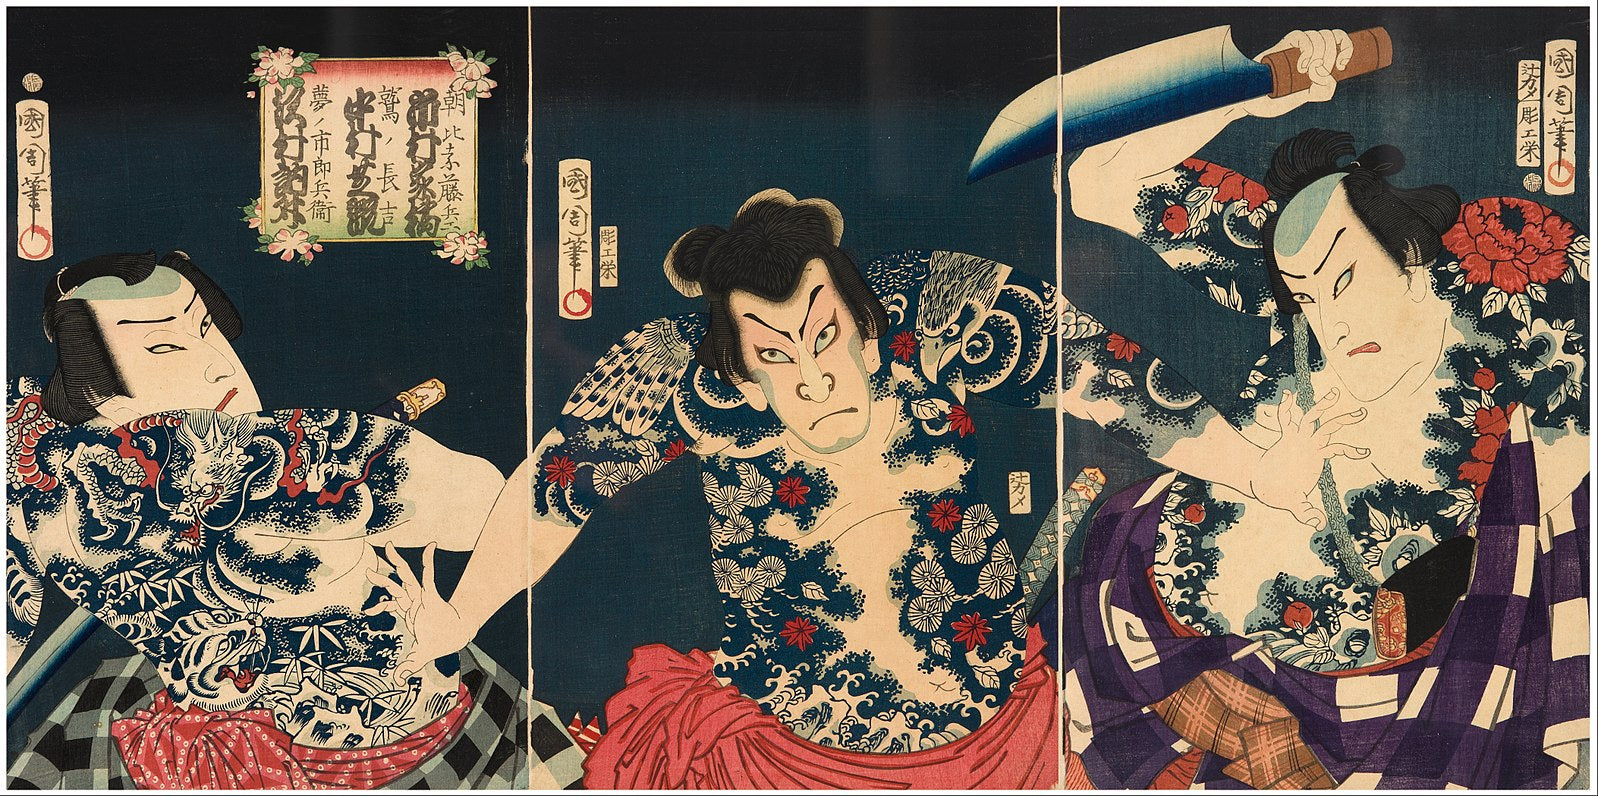 Ukiyo-e print by Toyohara Kunichika. A triptych features three men, all adorned in japanese bodysuit tattoos, fighting. One with a large knife, two with samurai swords.